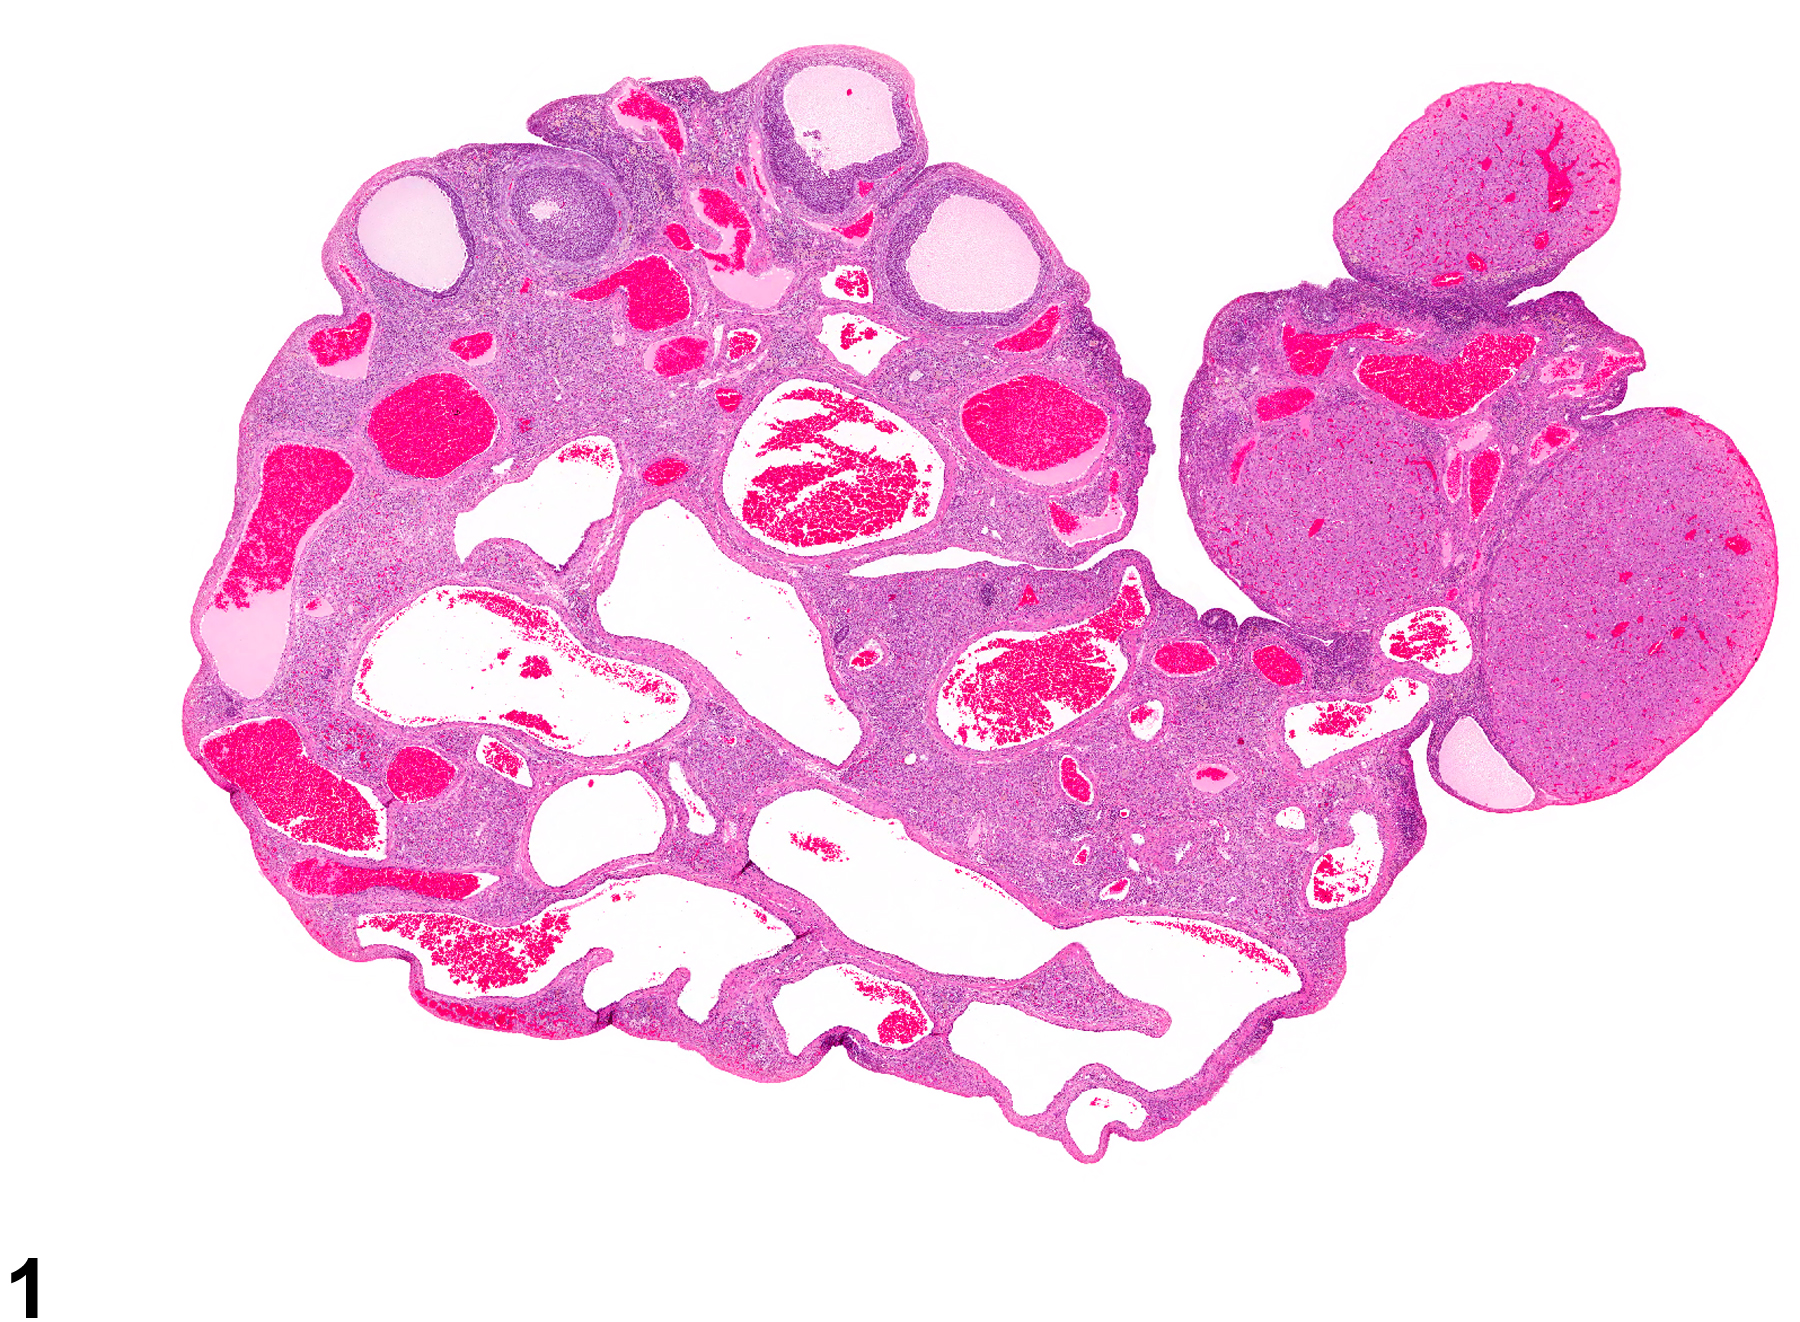 Image of angiectasis in the ovary from a female F344/N rat in a chronic study